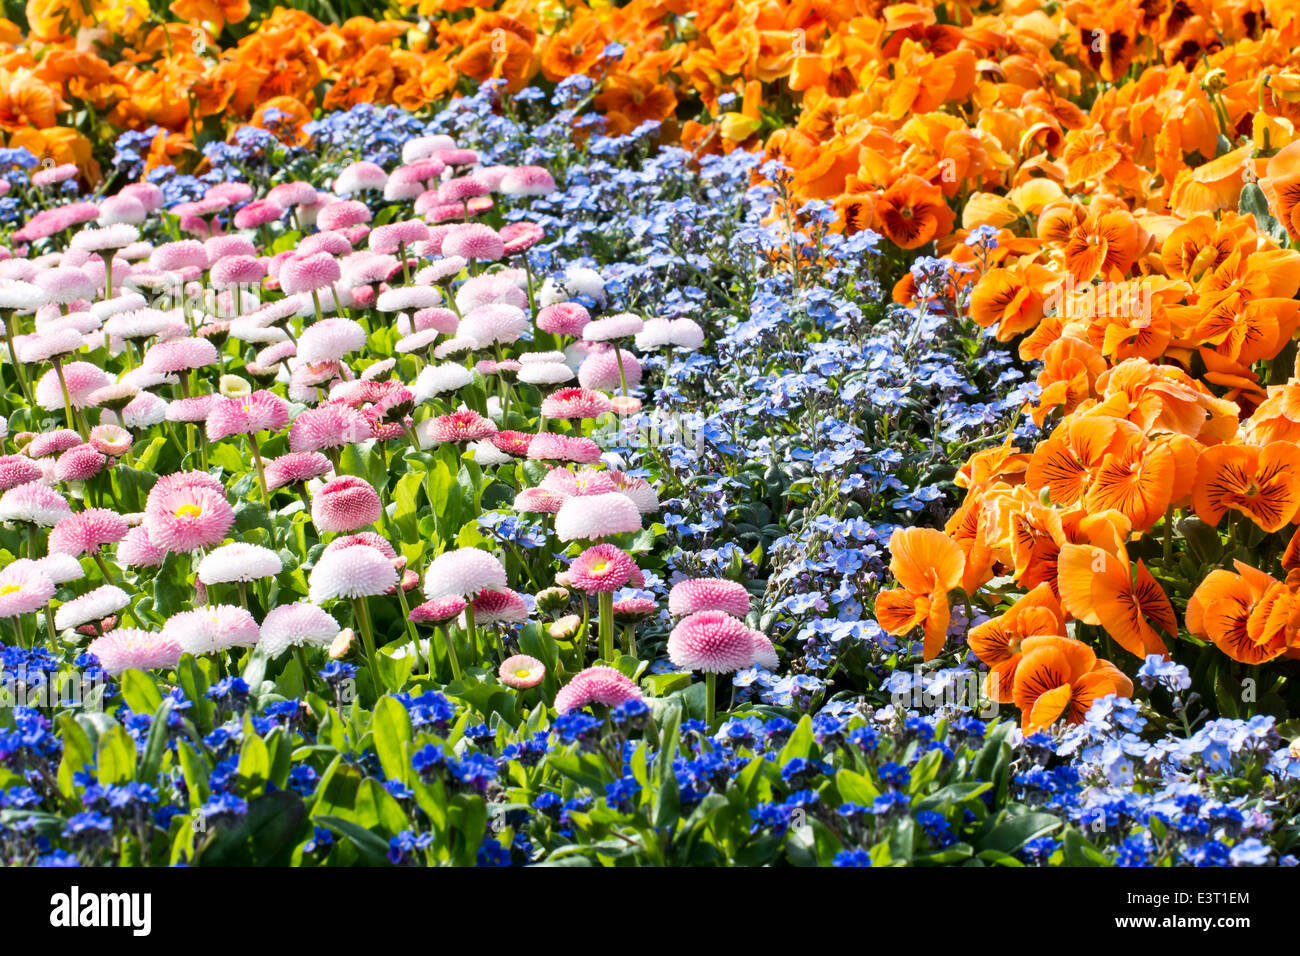 Garden with a flower bed full of gorgeous blossoms Stock Photo